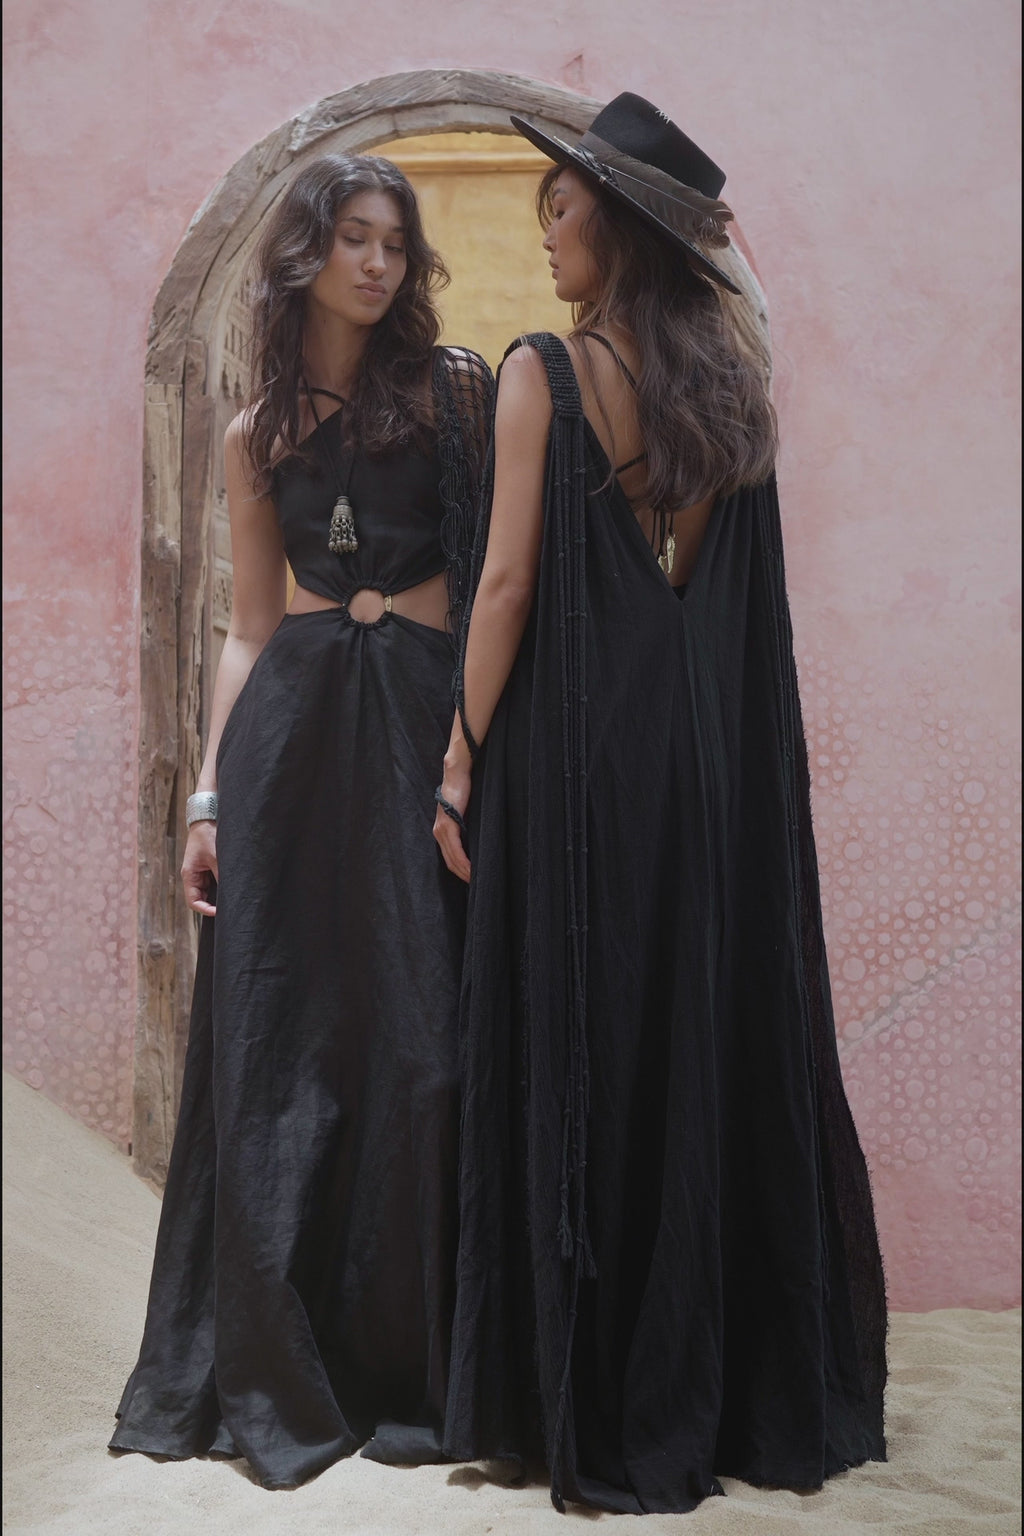 Get the perfect summer look with Aya Sacred Wear's Black Summer Cover Up.